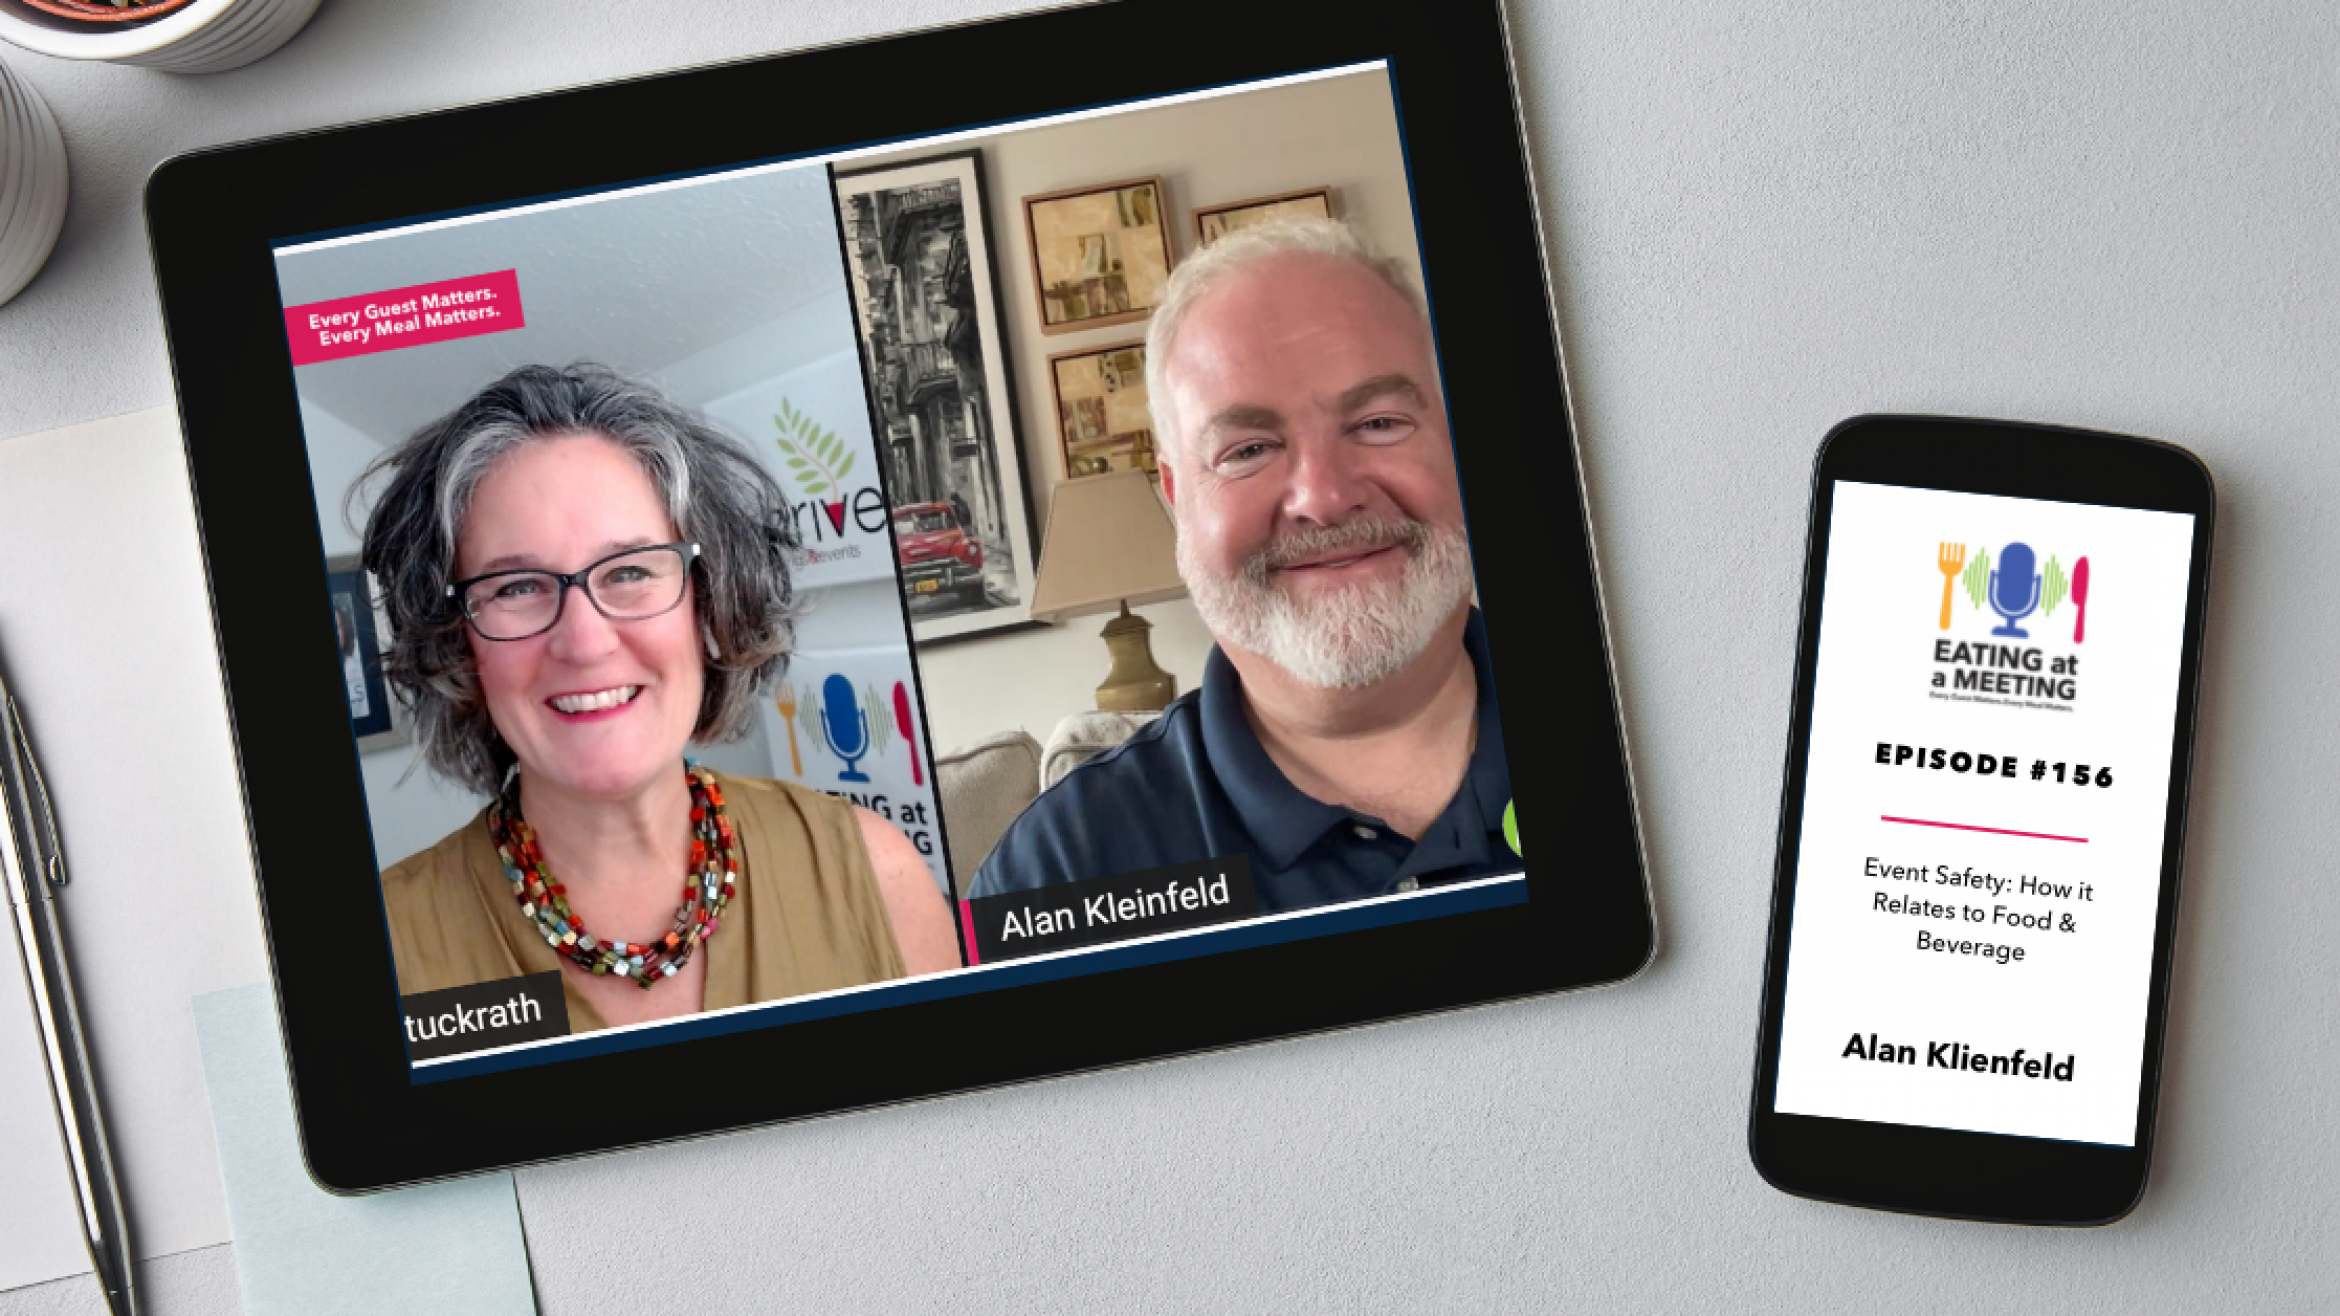 An iPad and iPhone on a table. On the iPad is a picture of two men who are on video screen. On the iPhone is the Eating at a Meeting podcast logo with Episode #156 Event Safety: How it Relates to Food & Beverage with Alan Kleinfeld